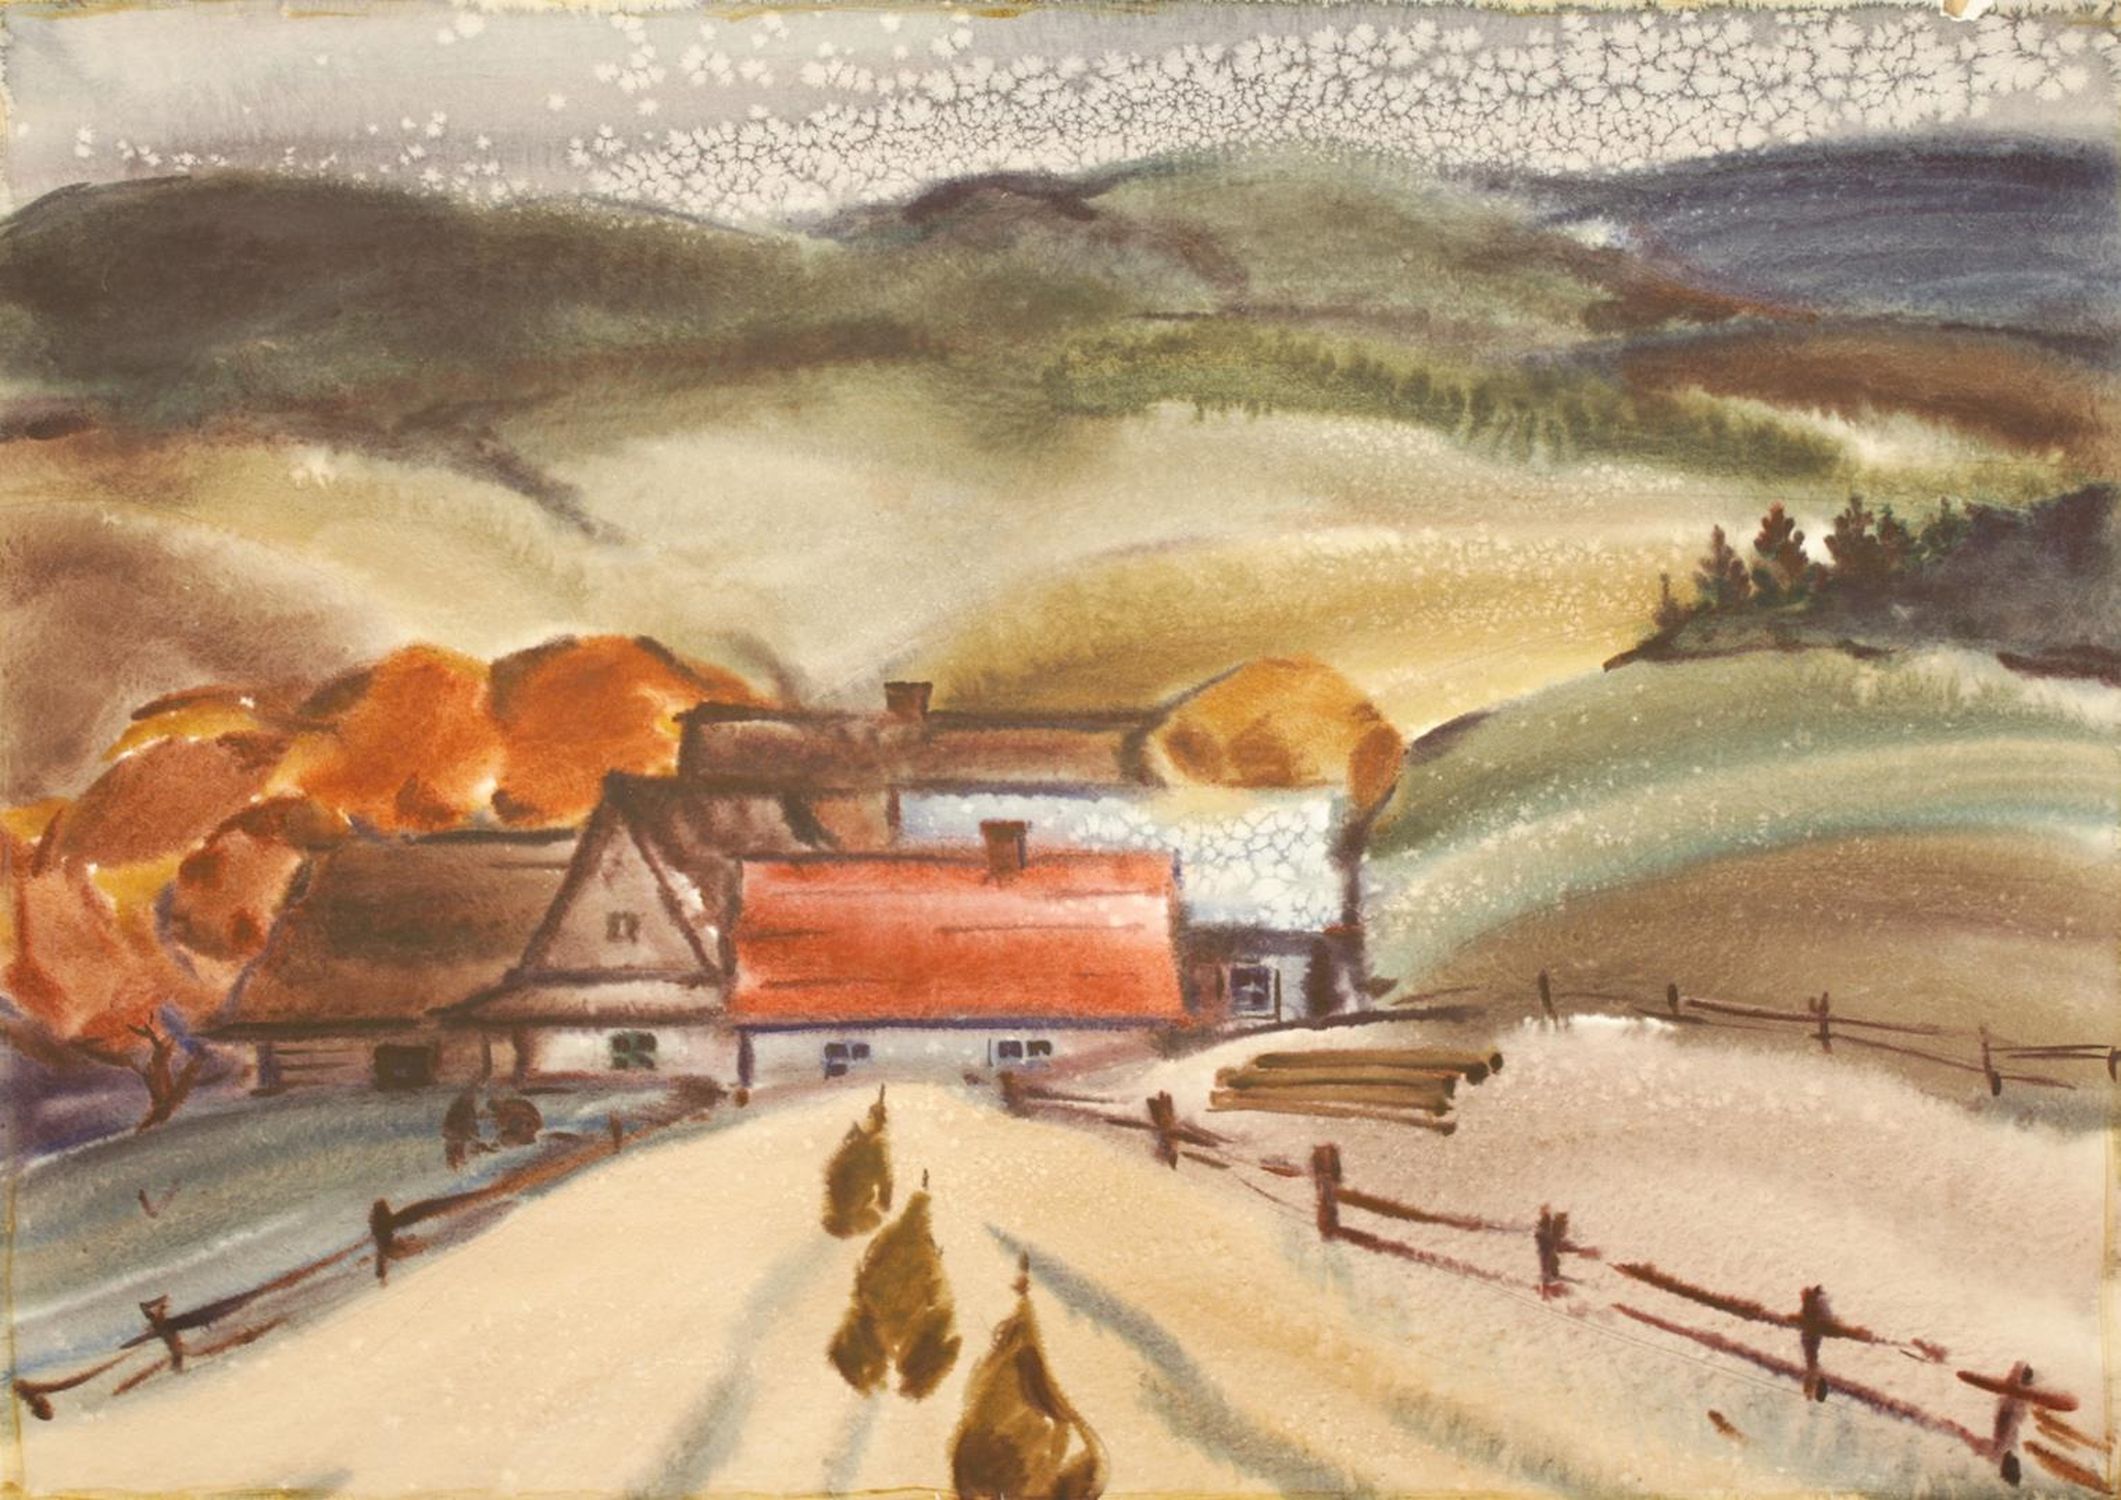 "The village in the mountains"